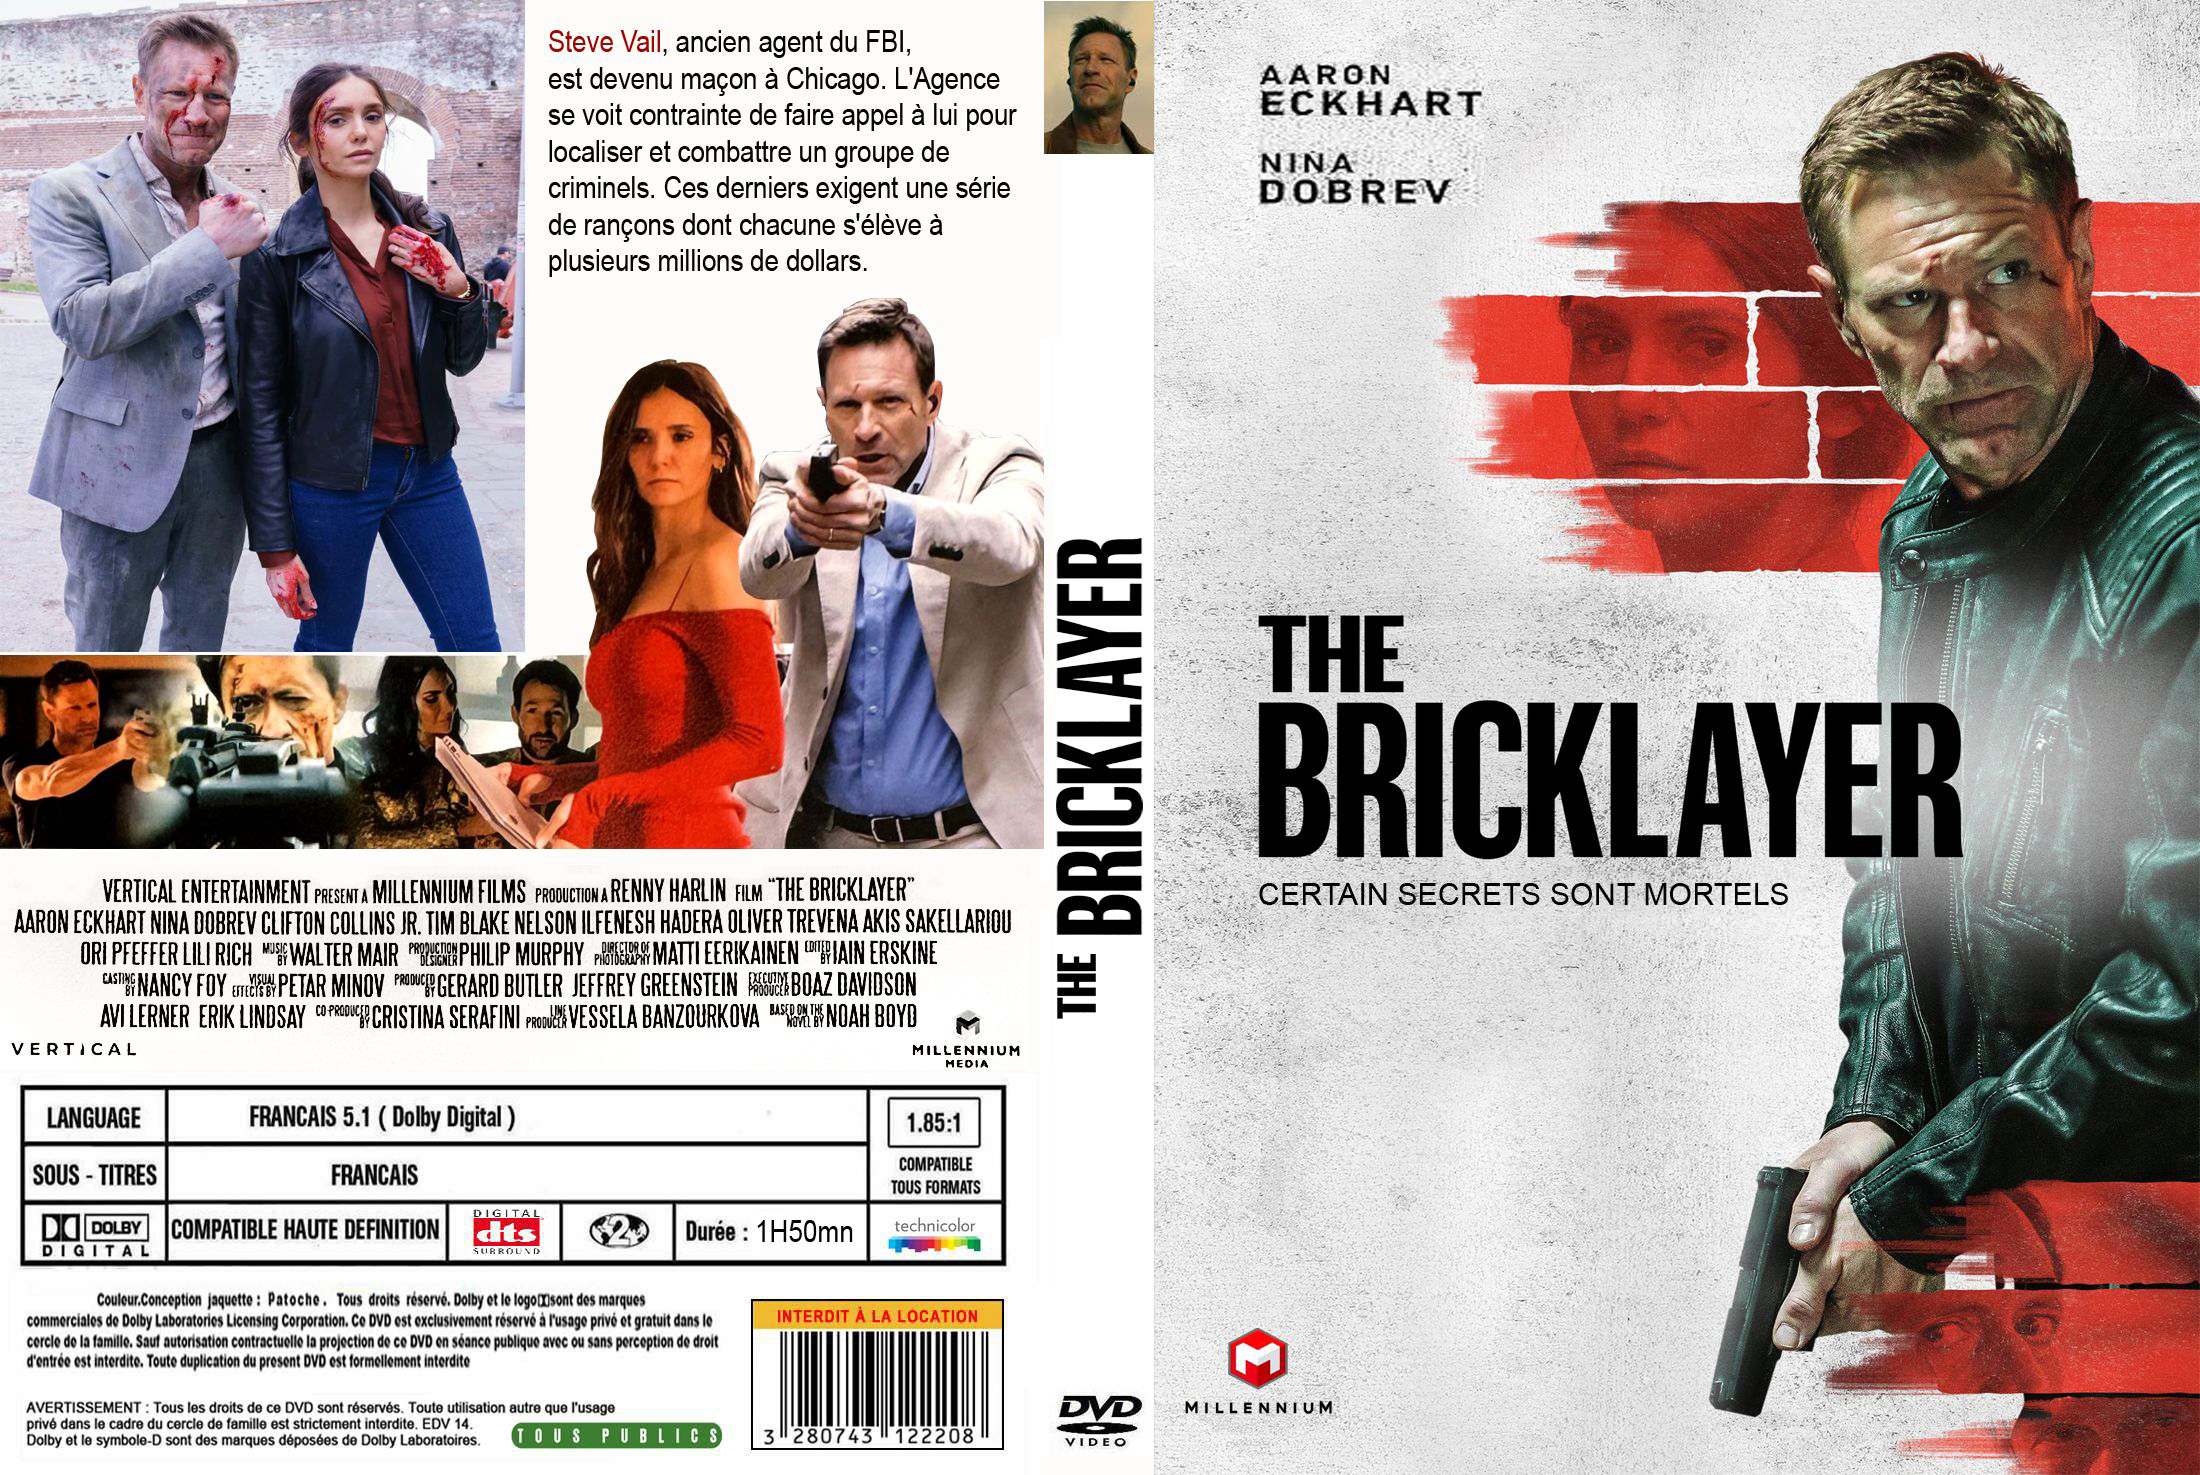 Jaquette DVD The bricklayer custom